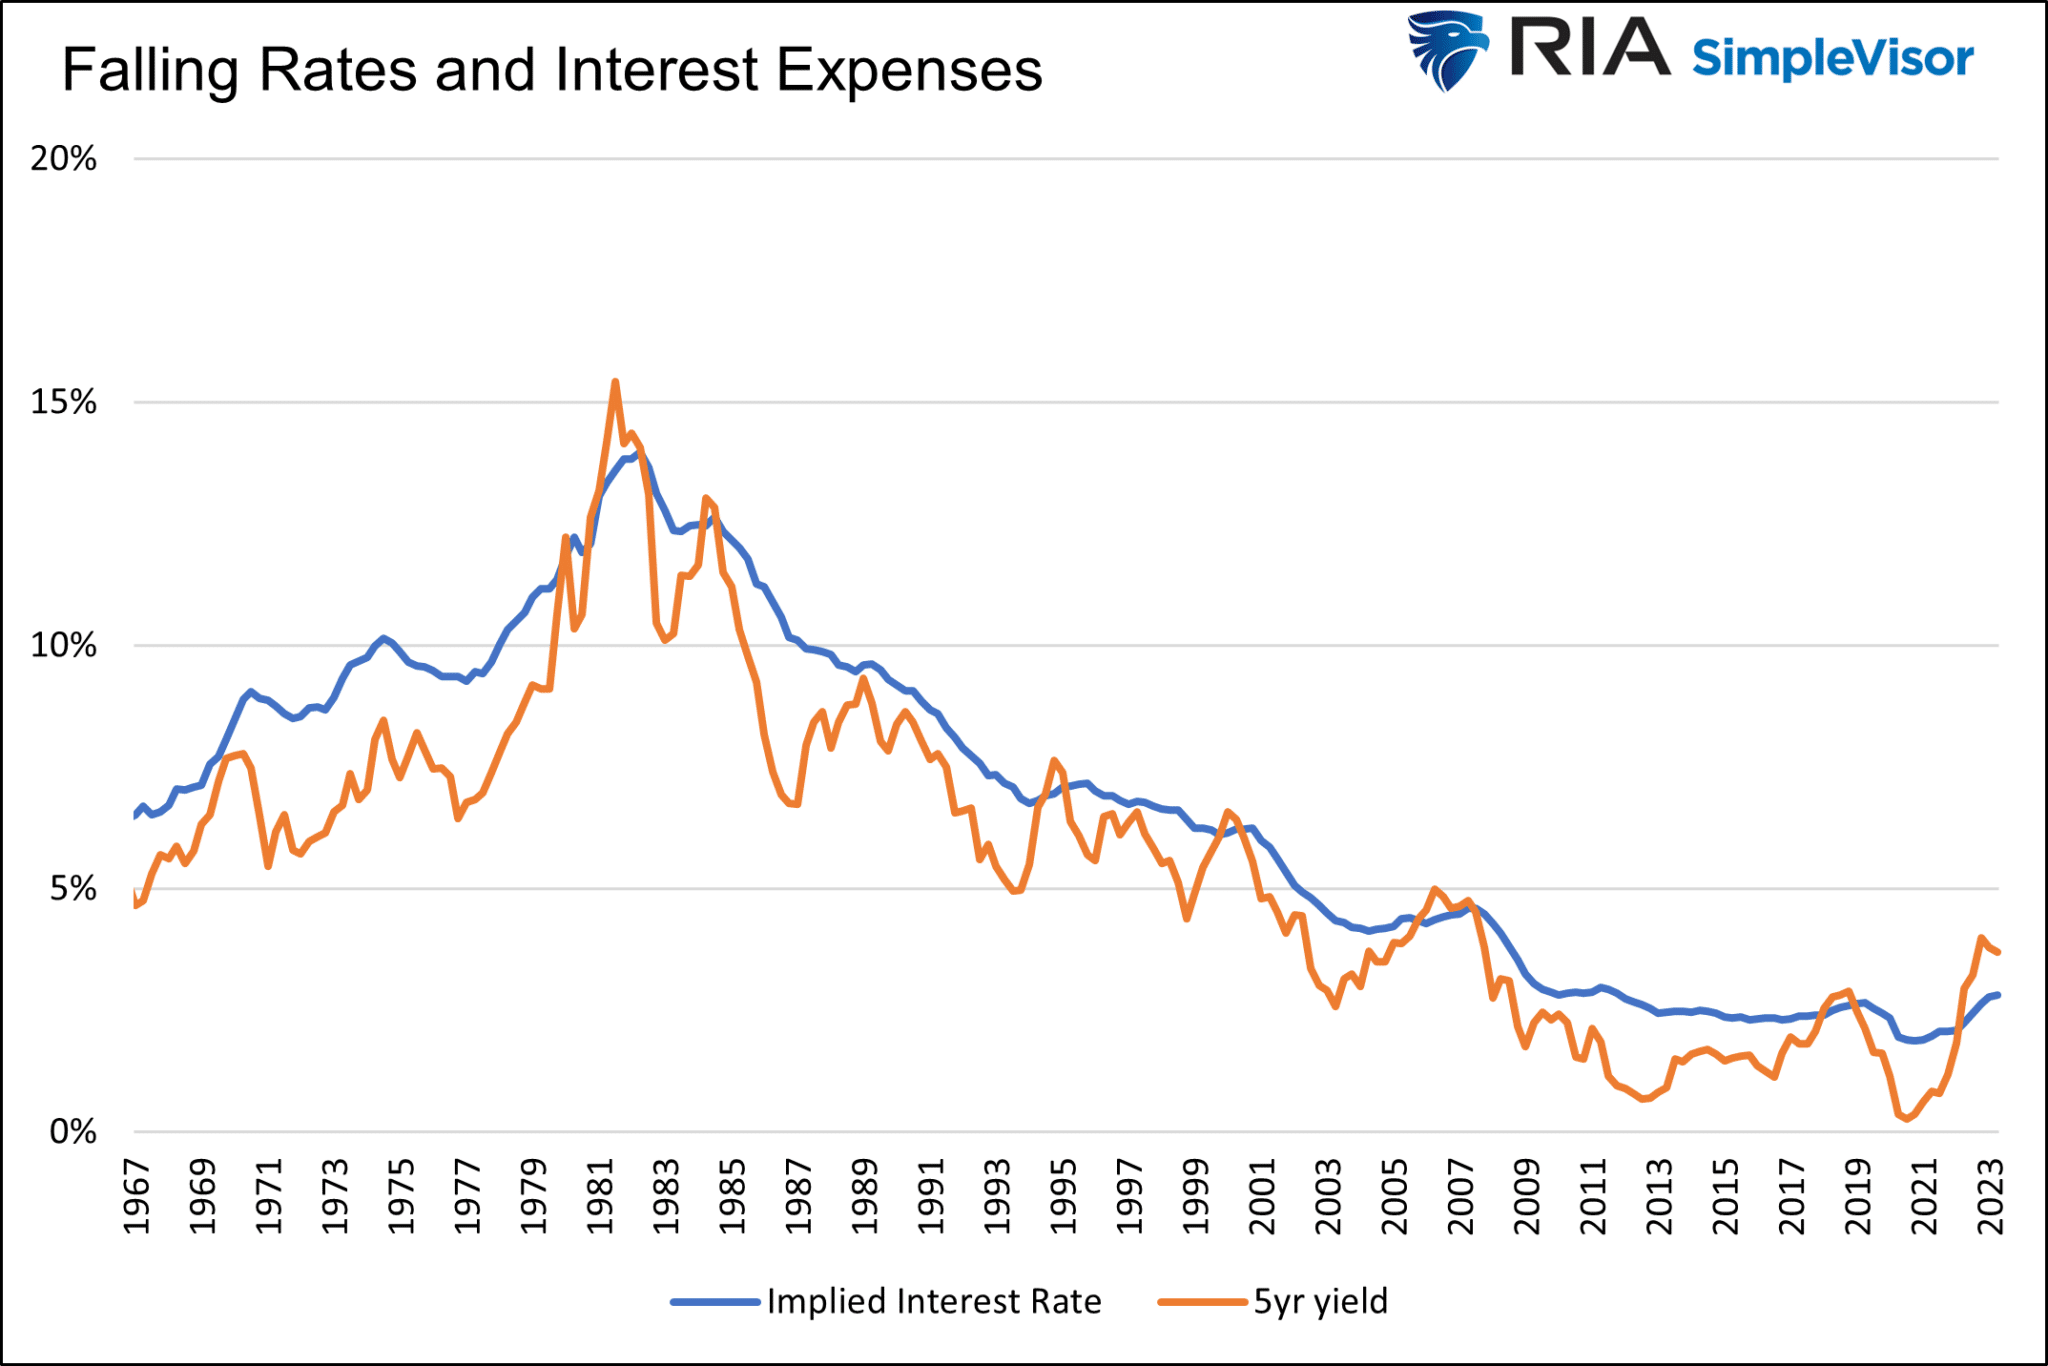 Falling Rates and Interest Expense